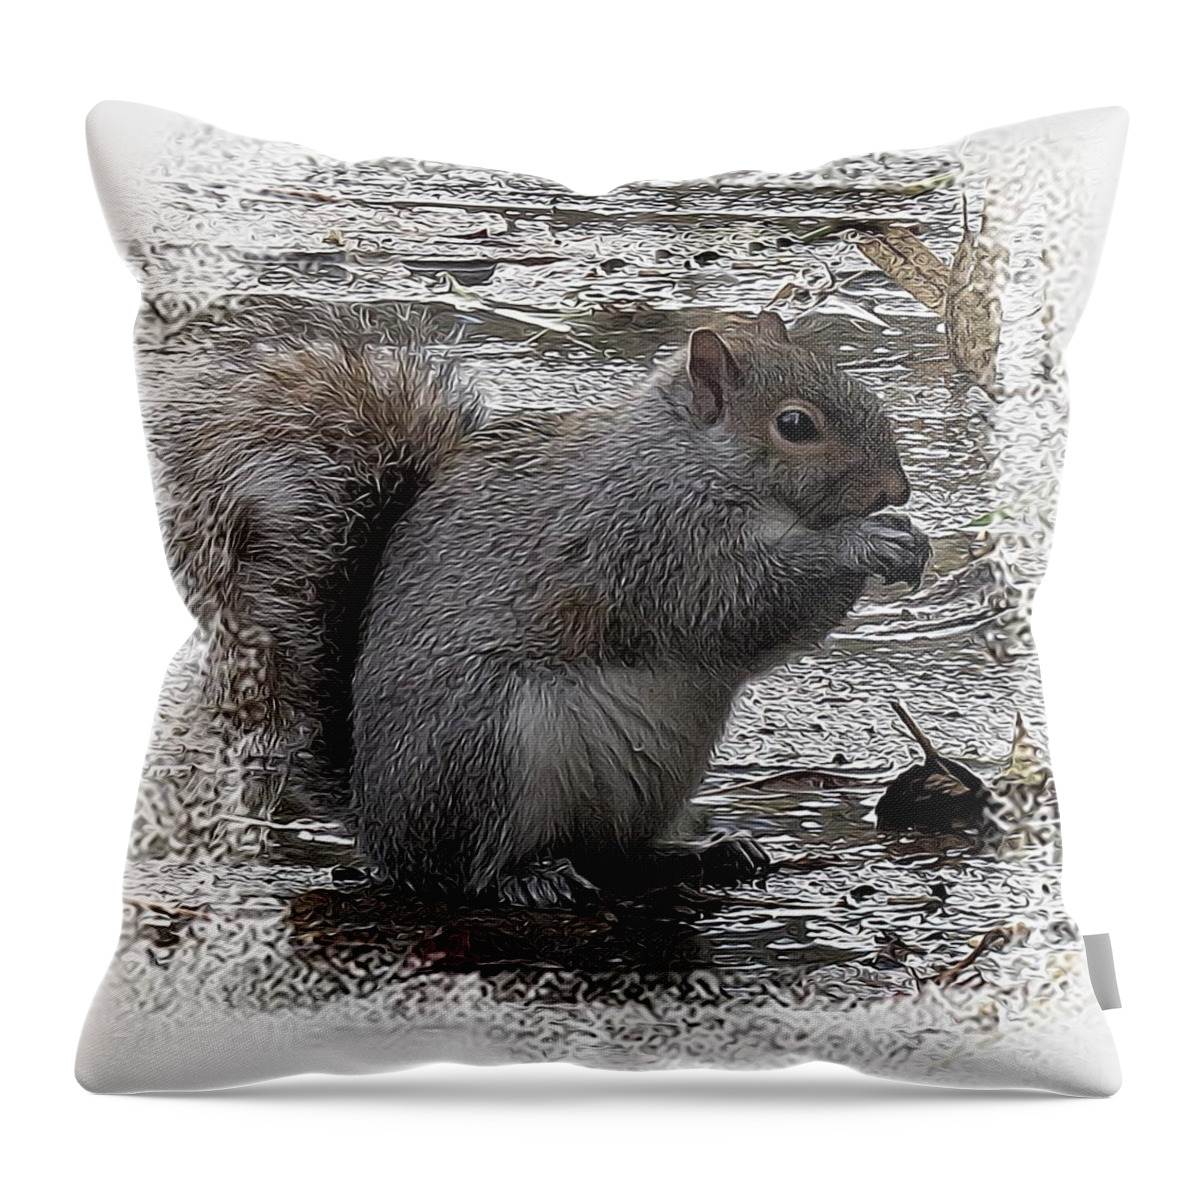 Foraging Gray Squirrel Throw Pillow featuring the photograph Winter Foraging by I'ina Van Lawick